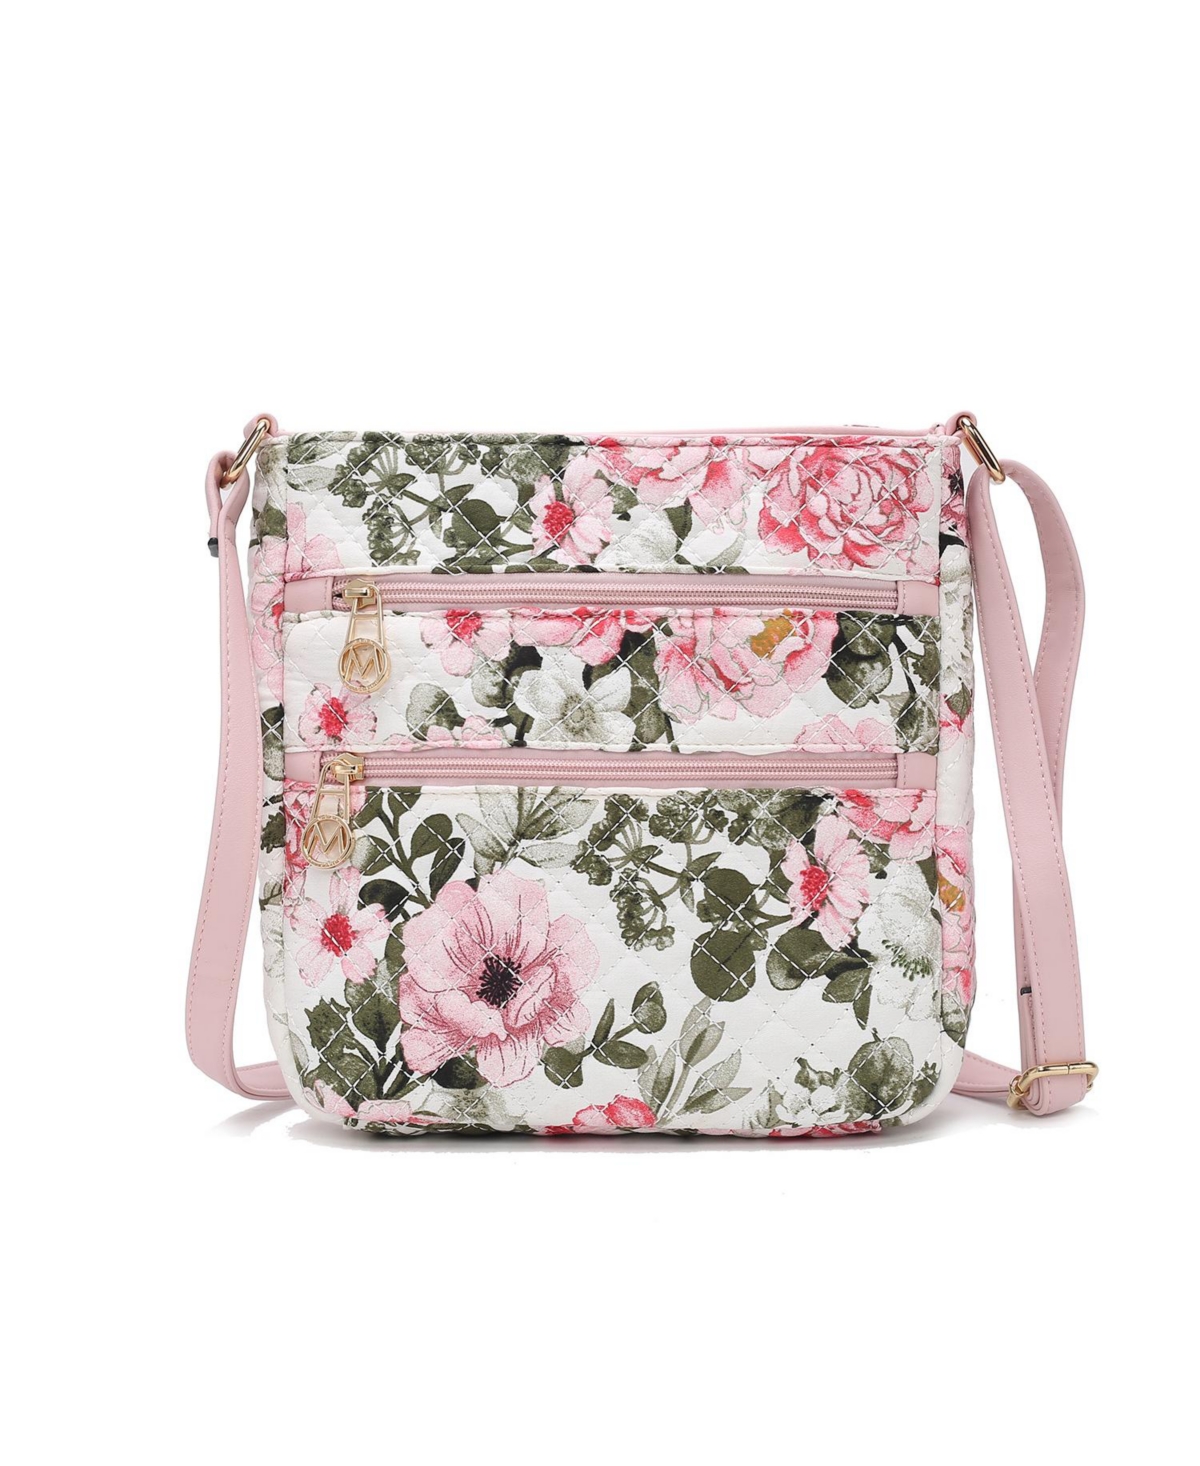 Lainey Quilted floral Pattern Women's Cross body by Mia K - Blush mauve